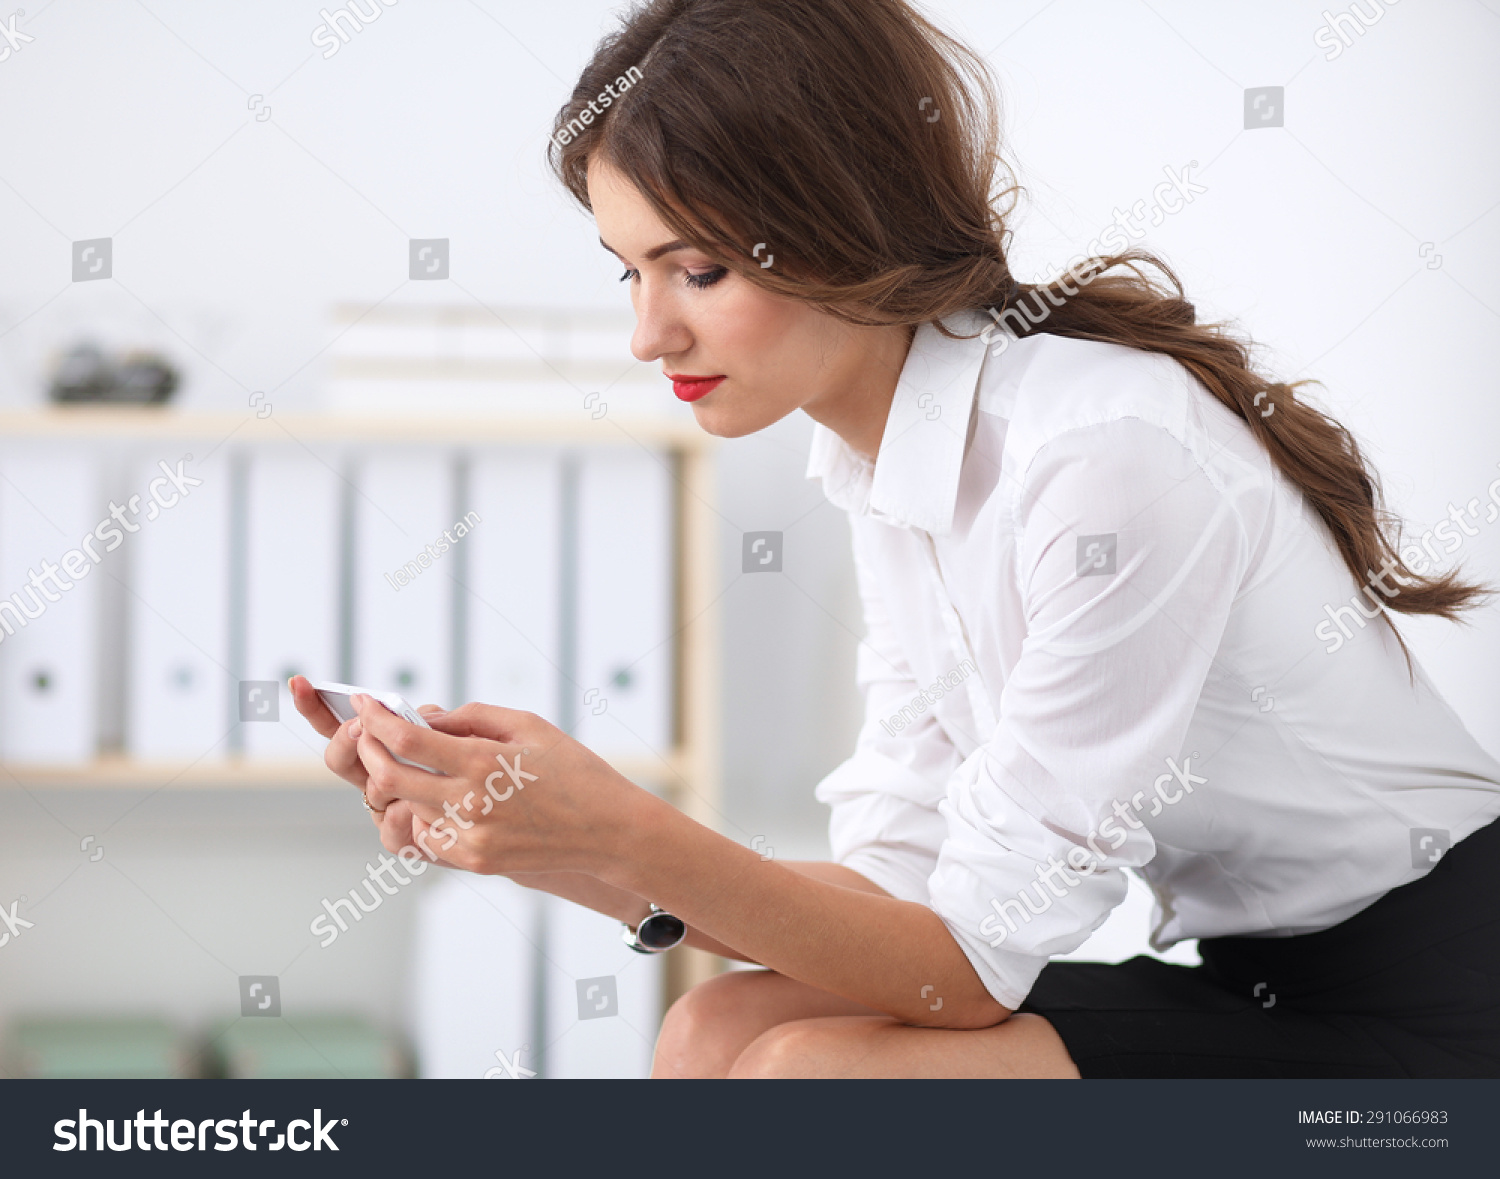 Businesswoman sending message with smartphone in office  #291066983